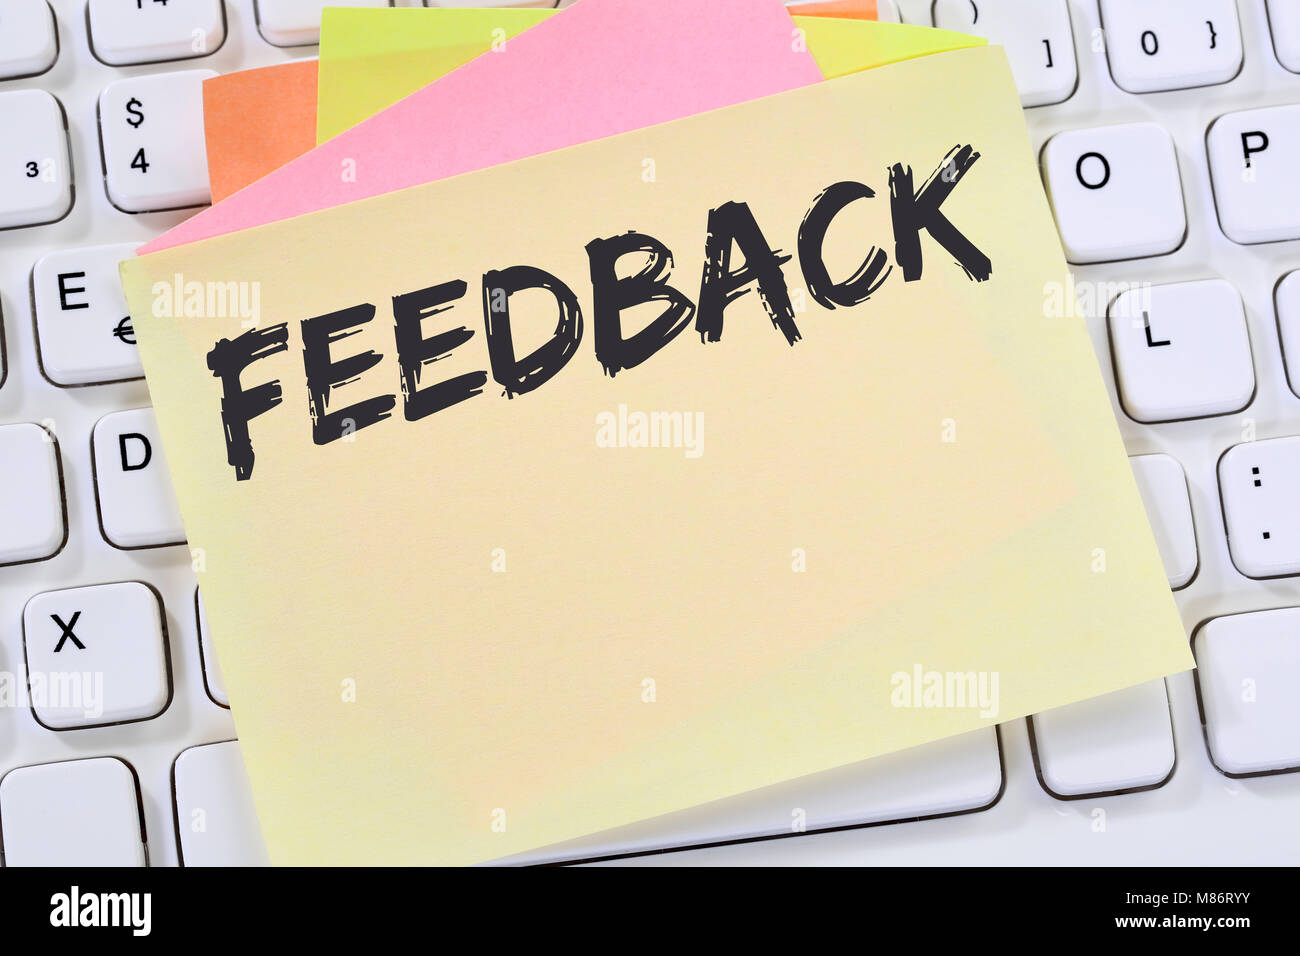 Feedback contact customer service opinion survey business review concept note paper computer keyboard Stock Photo